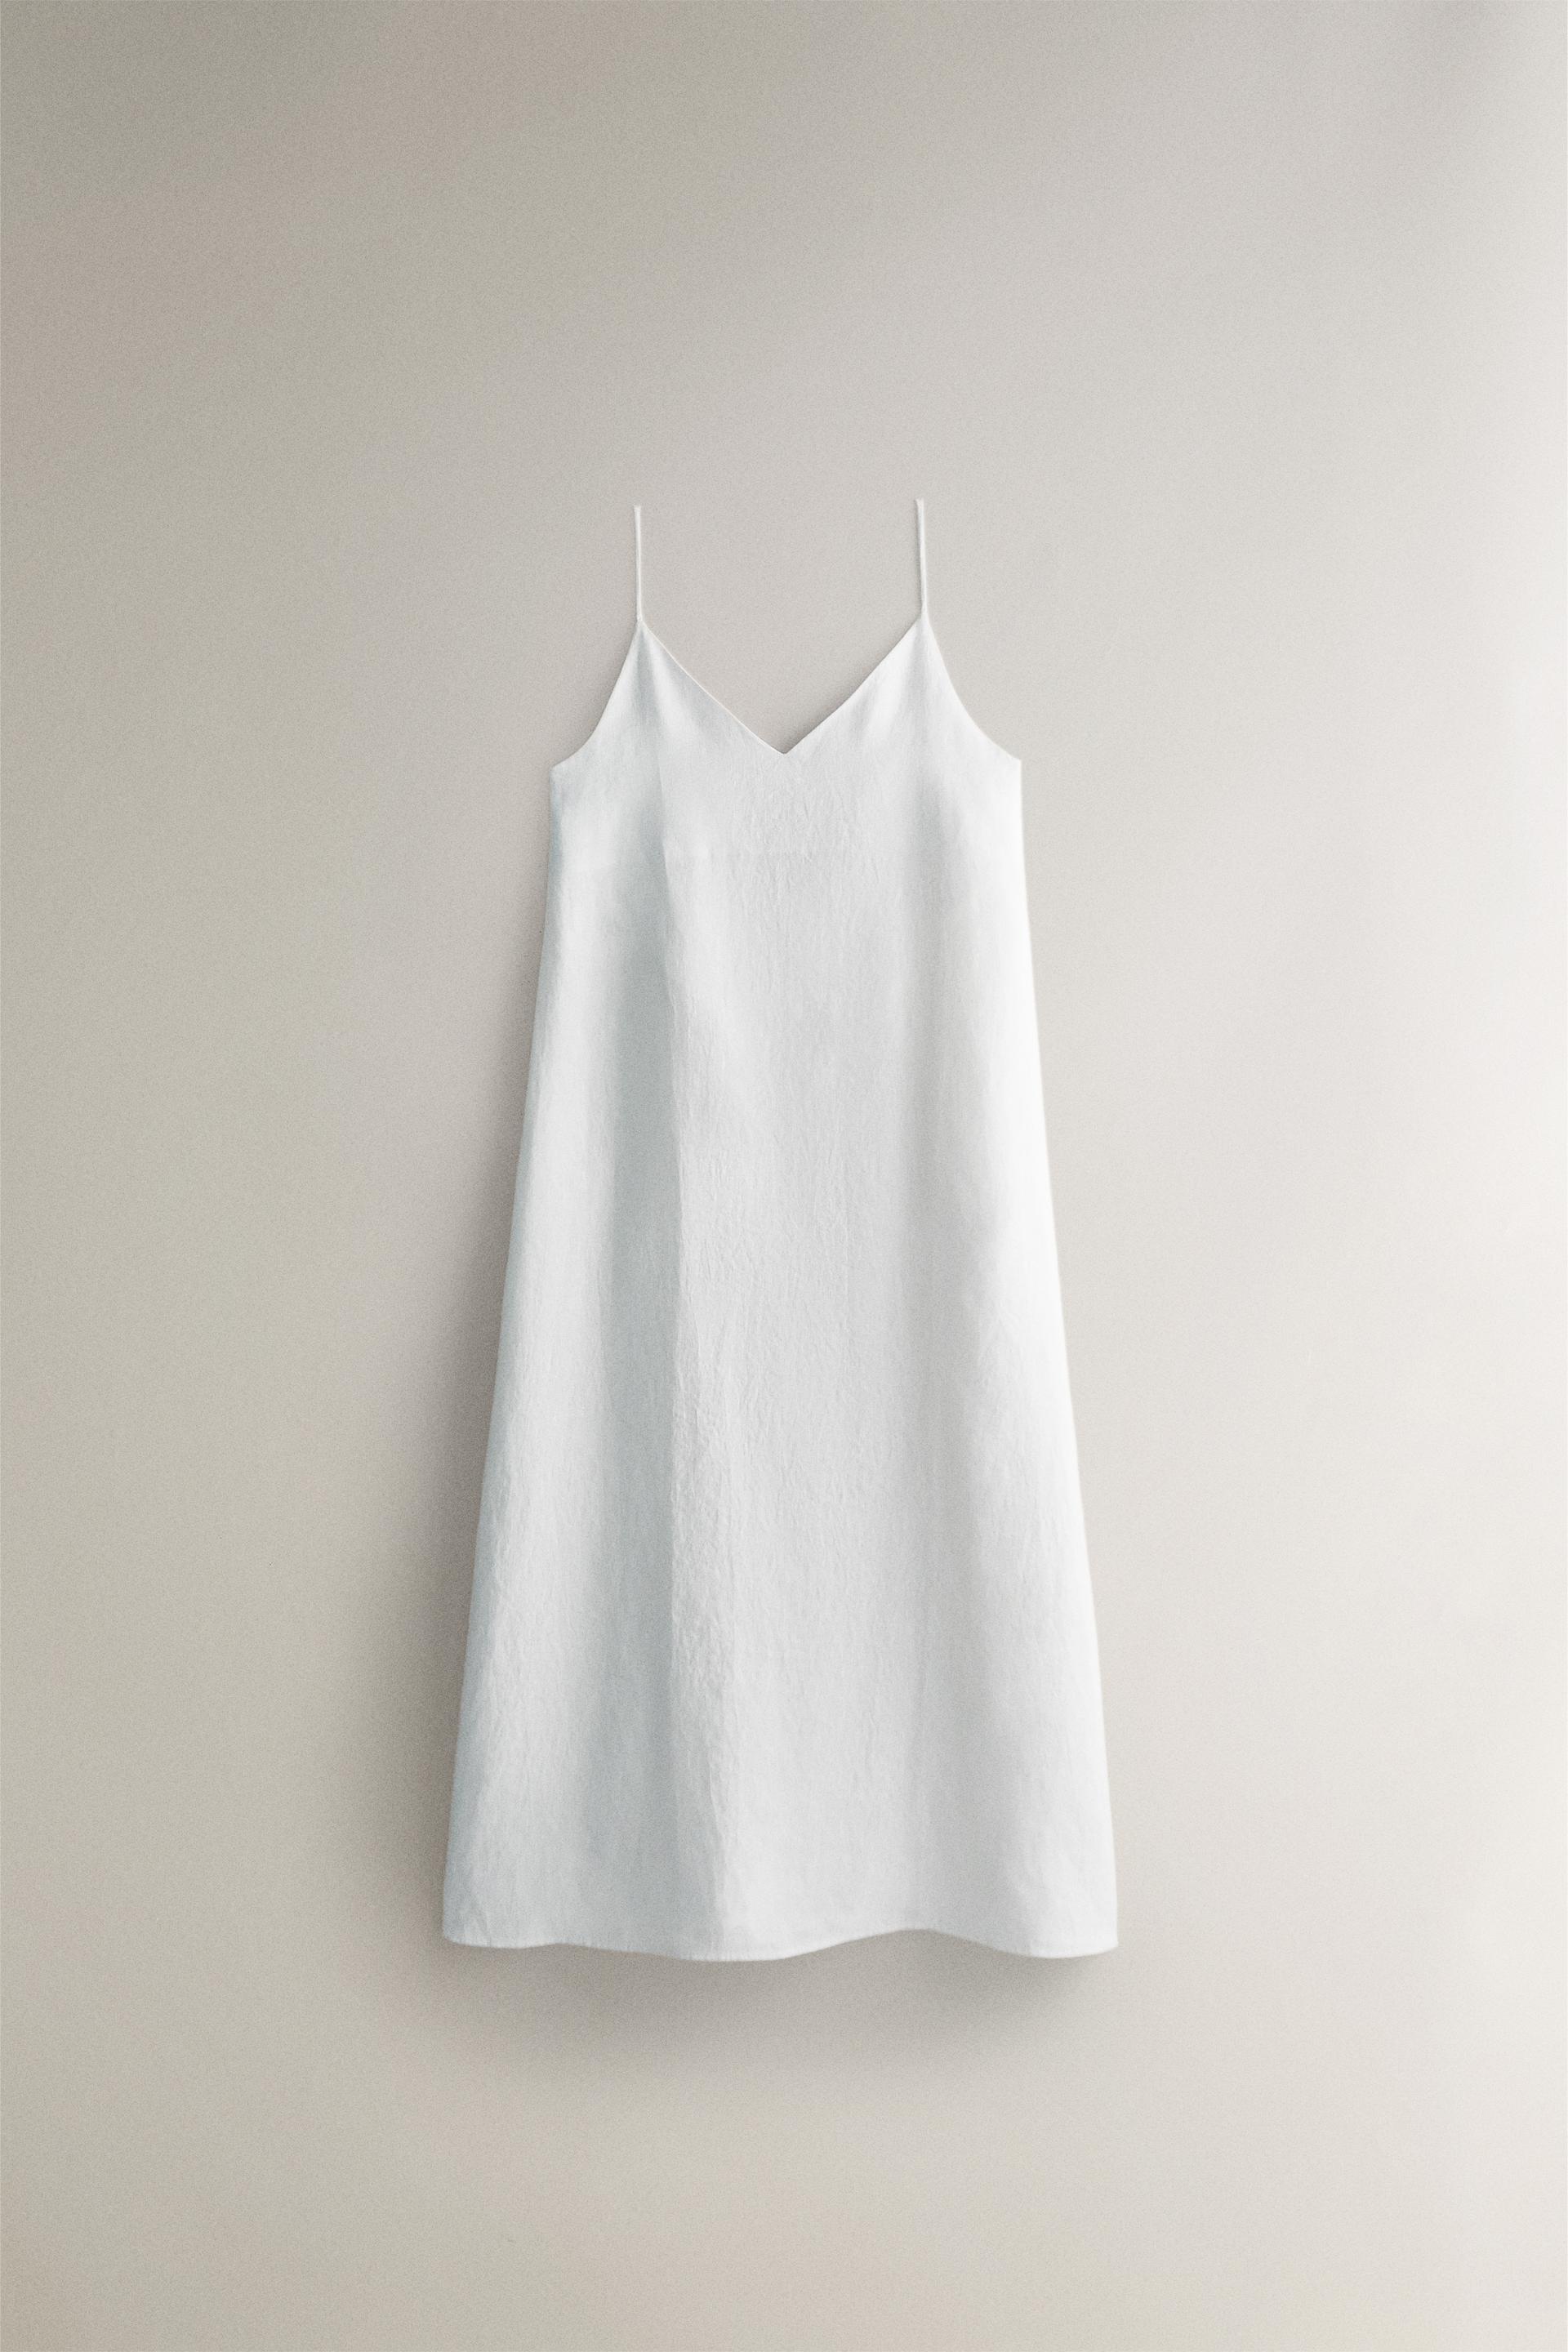 SOLID-COLORED LINEN NIGHTGOWN ZARA